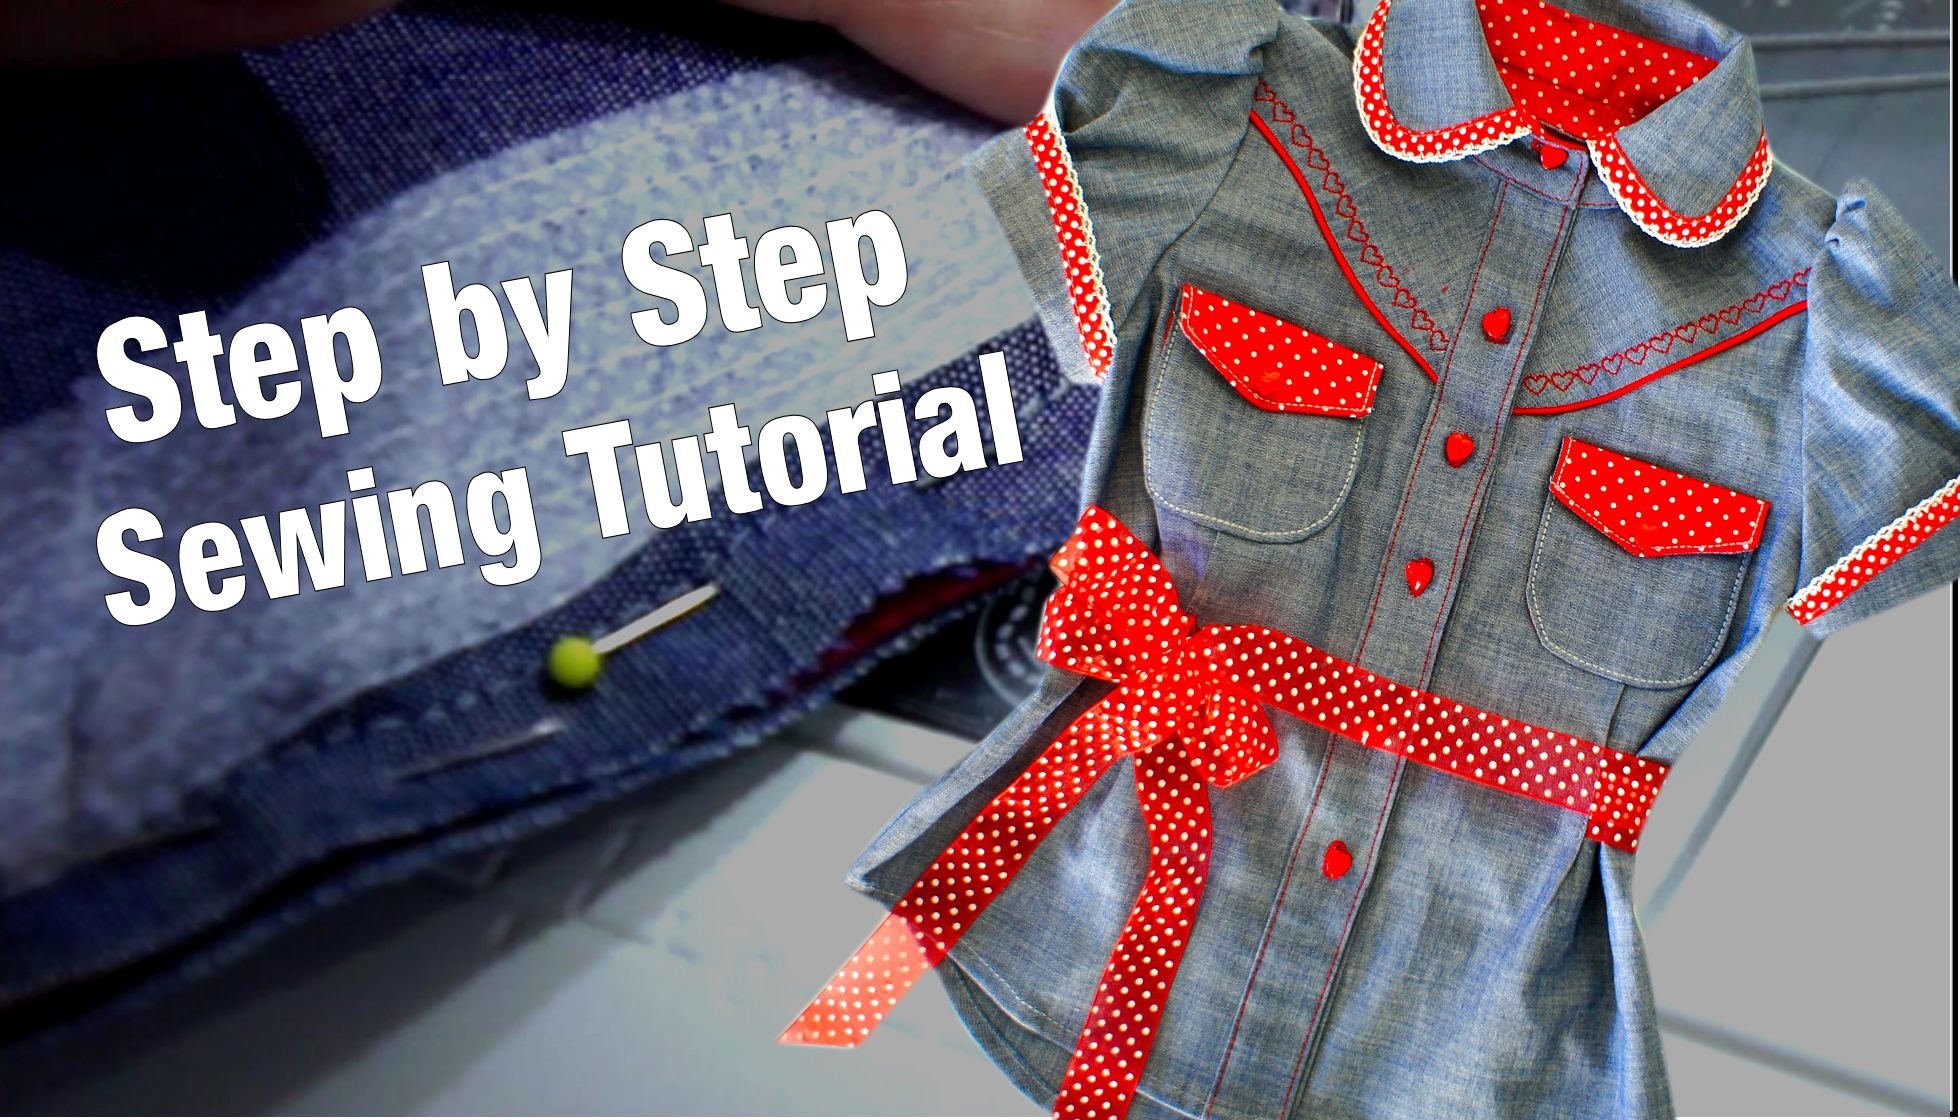 How to stitch a blouse step by step She is wearing a long black beautiful dress